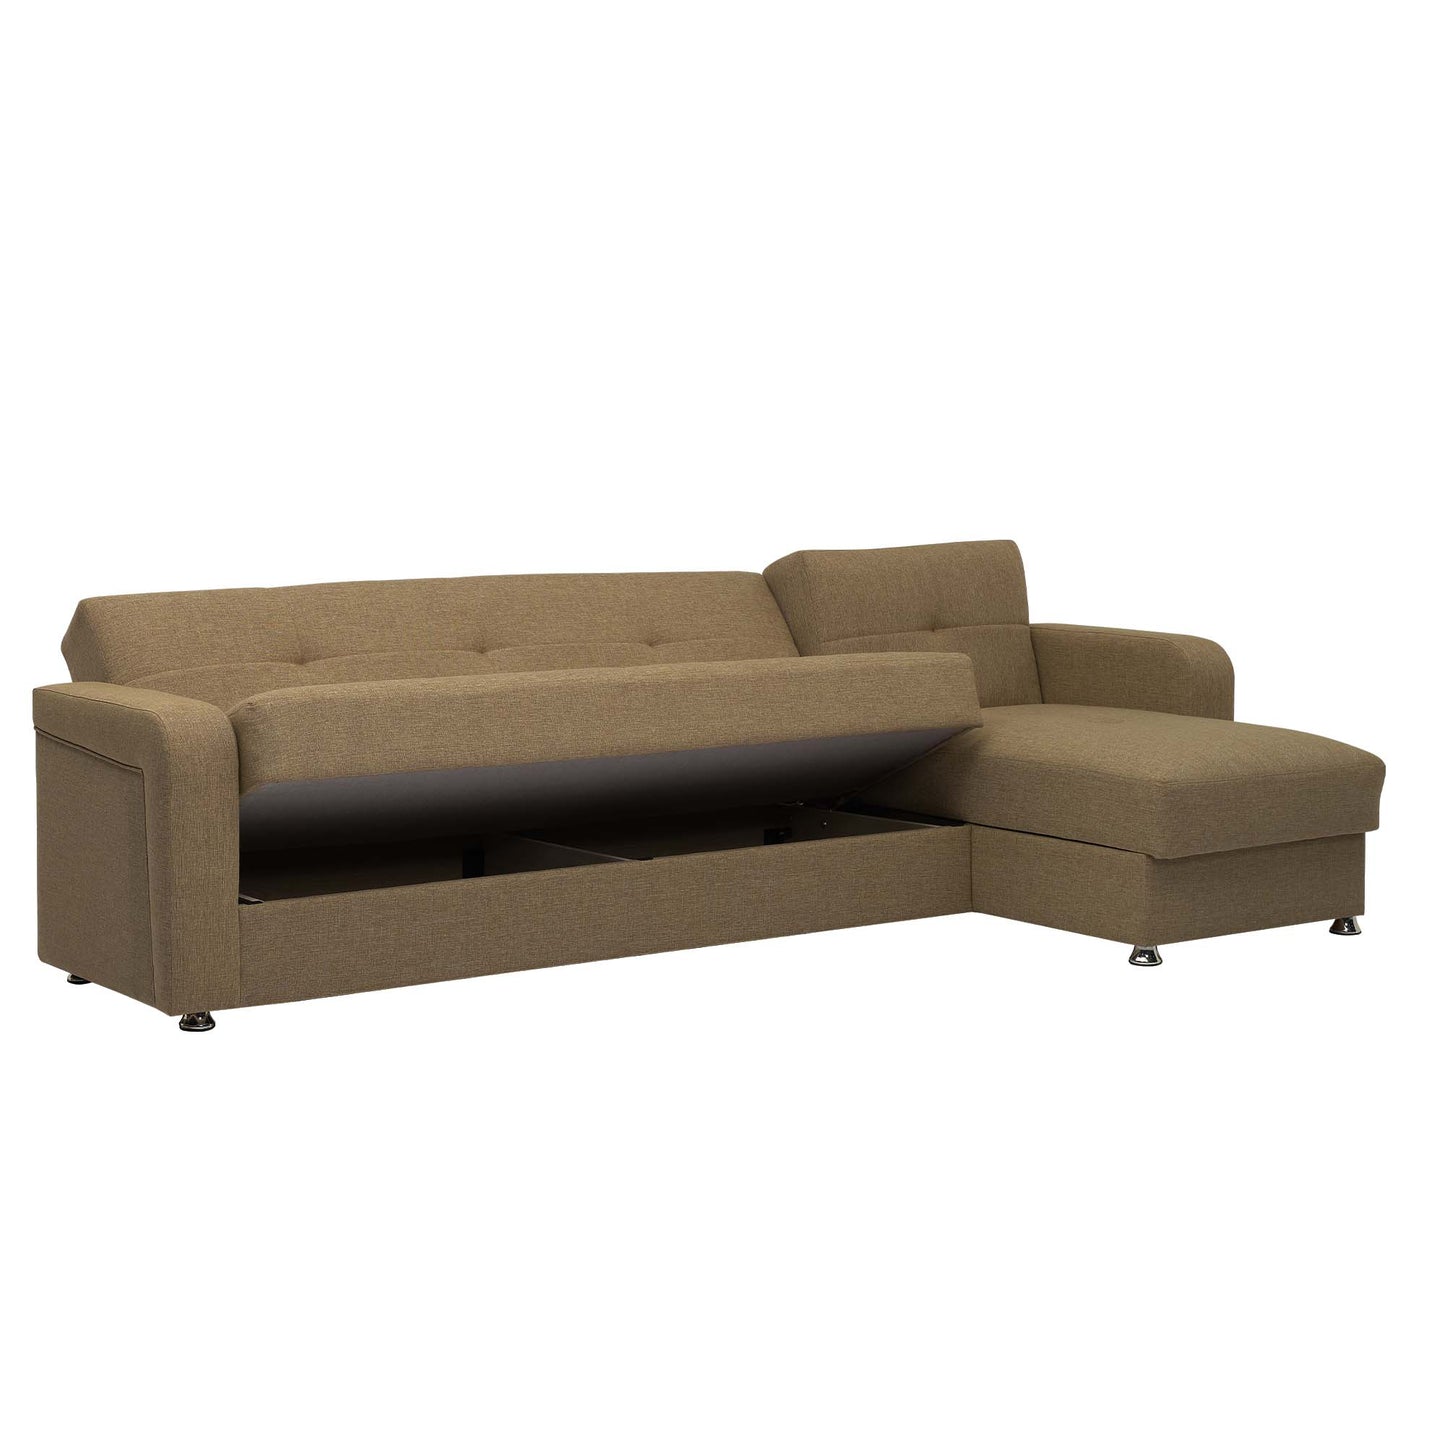 Harmony Upholstered Convertible Sectional with Storage Brown